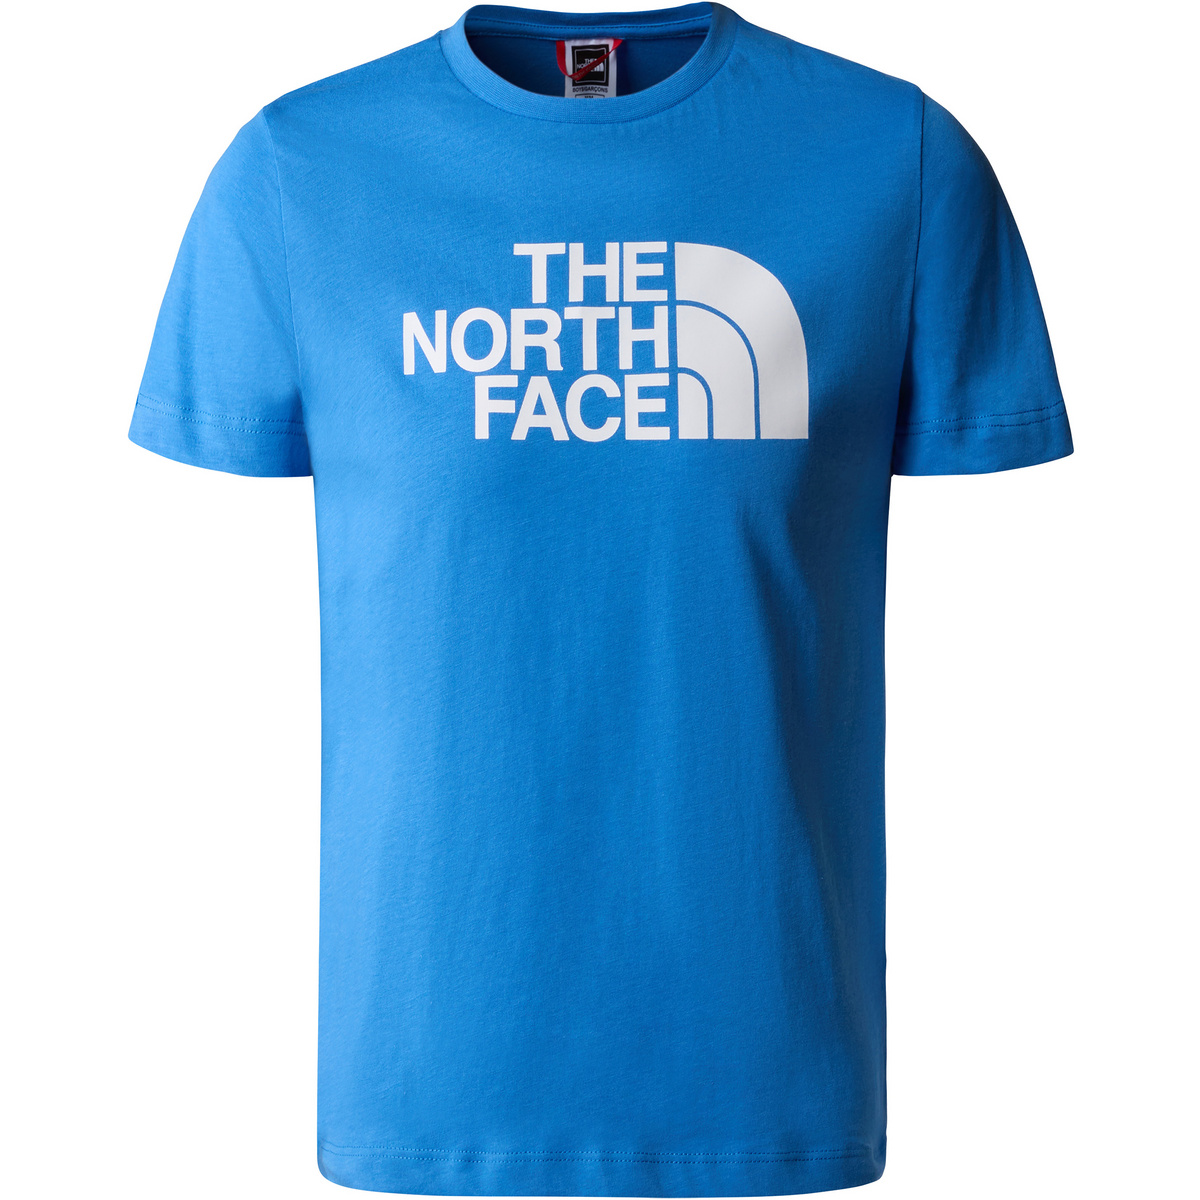 The North Face Kinder B Easy T-Shirt von The North Face